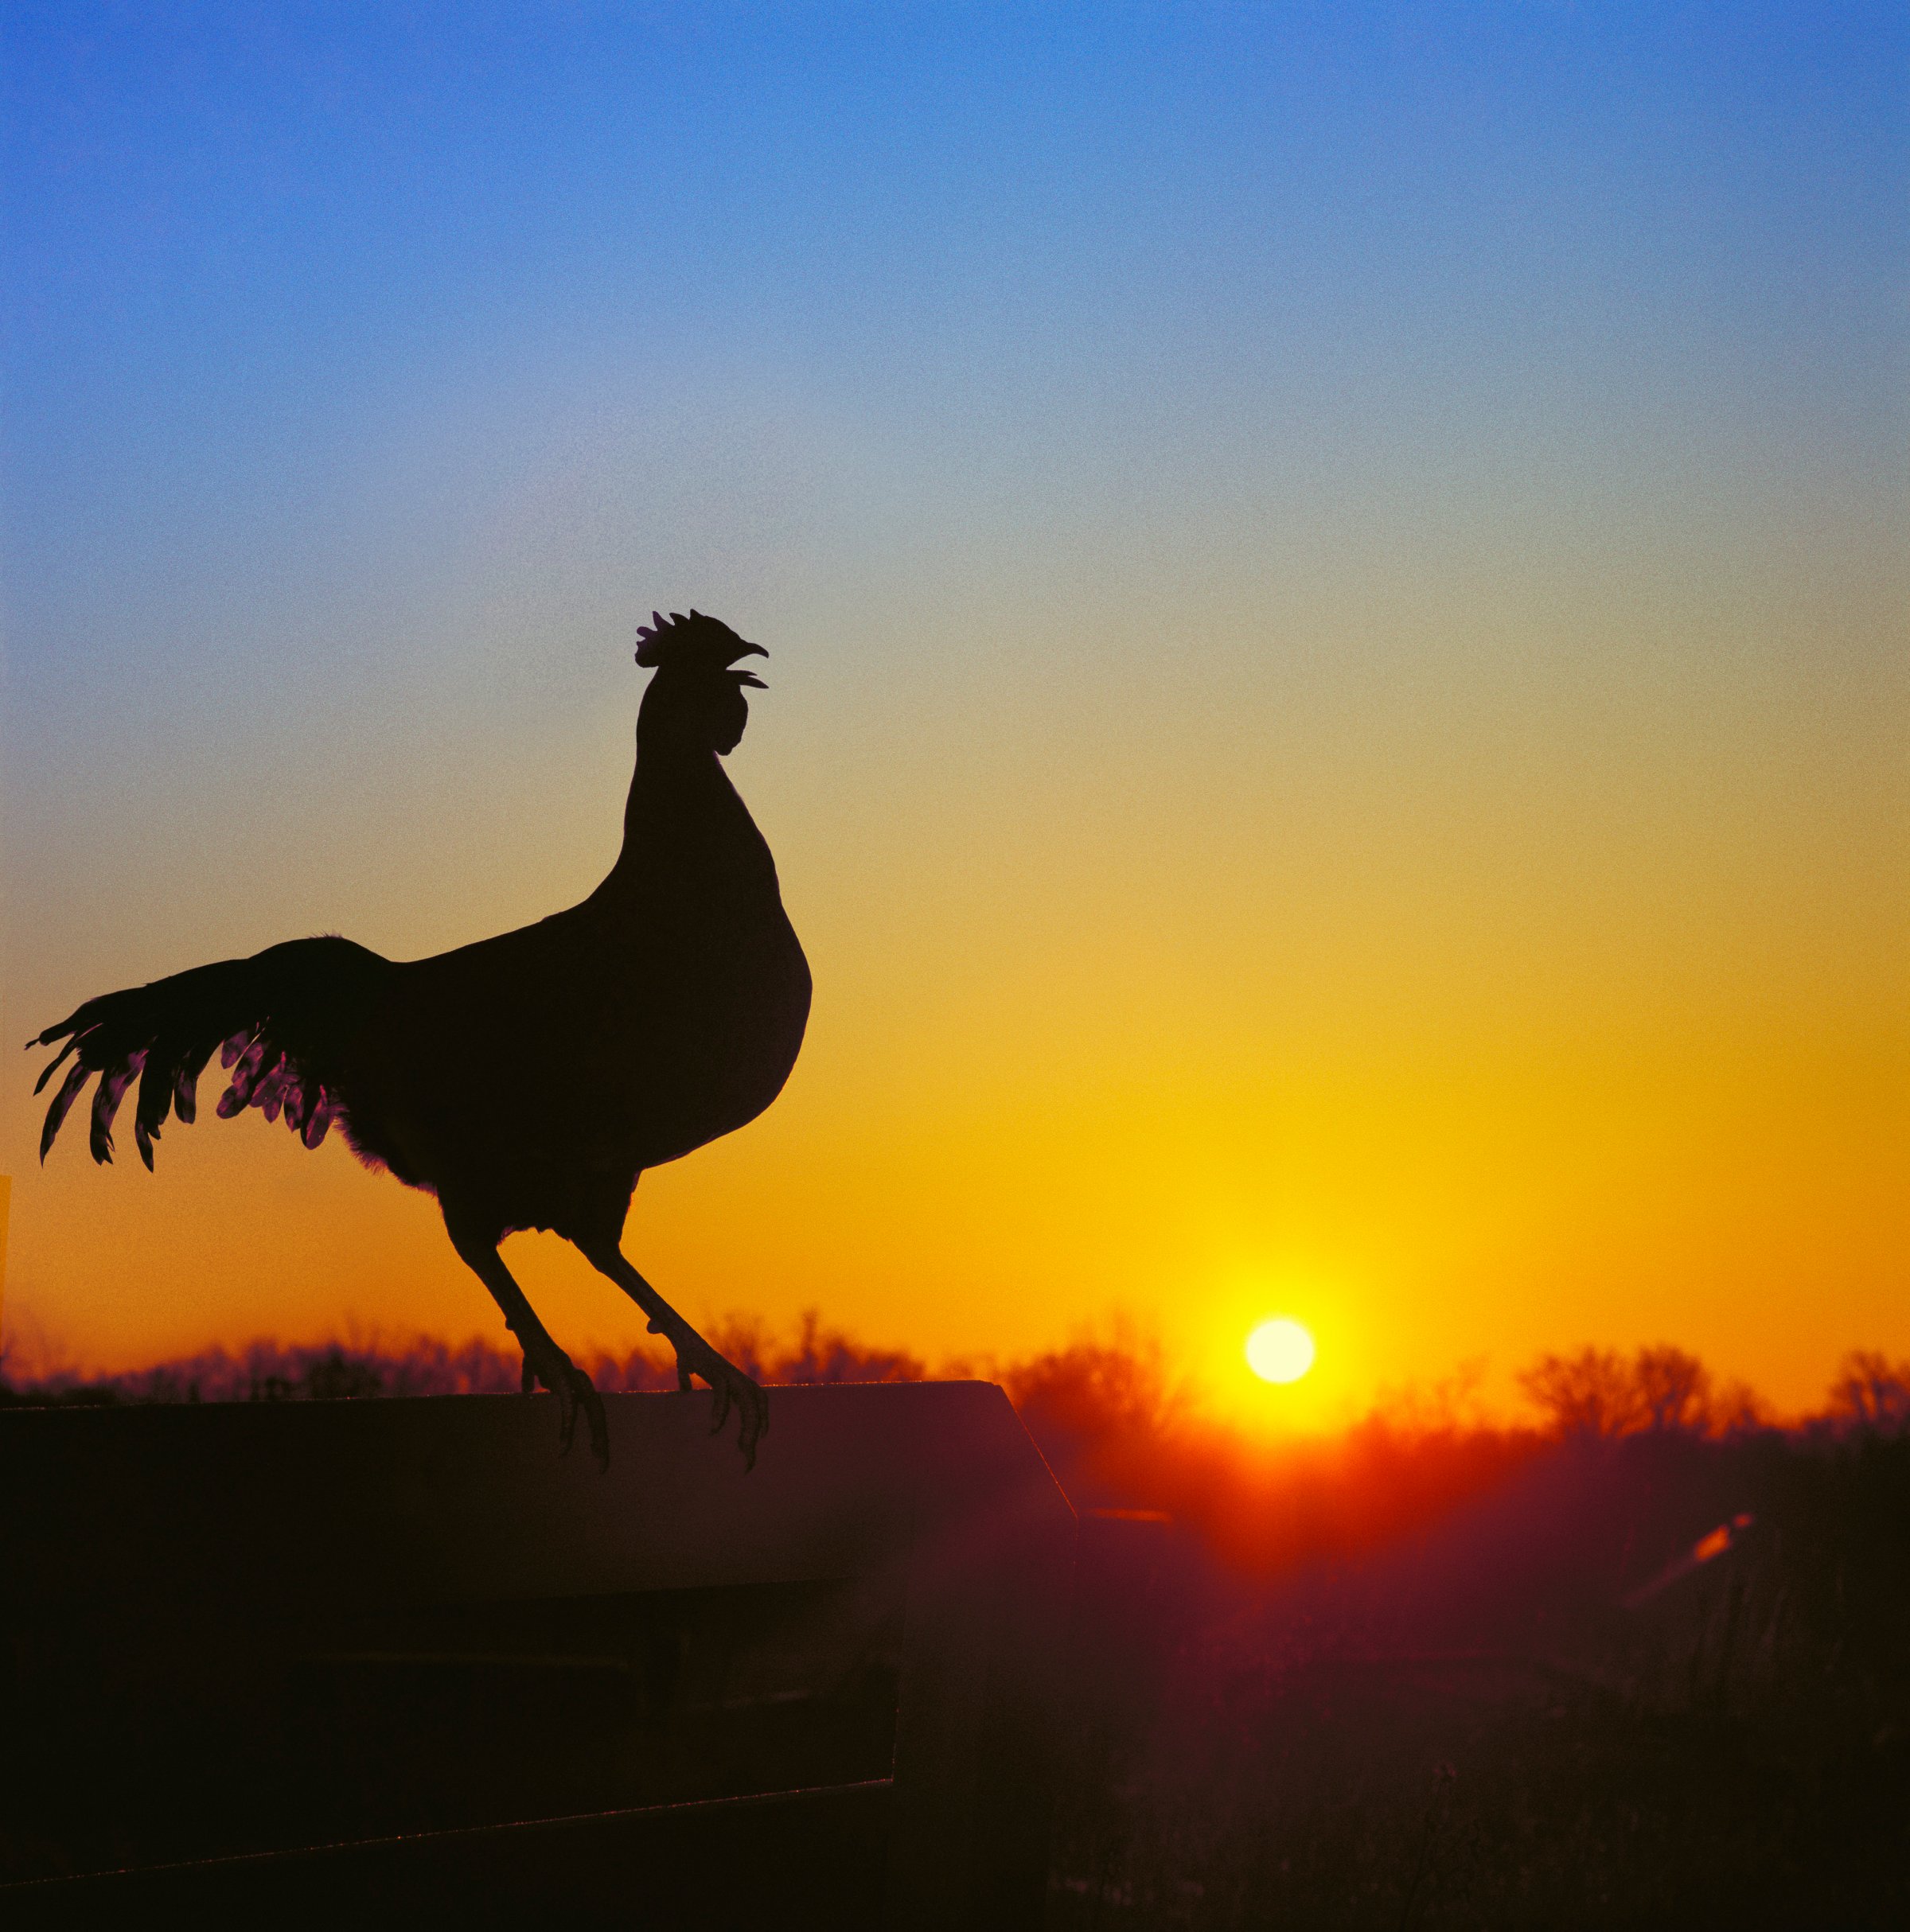 Rooster on fence at dawn, crowing